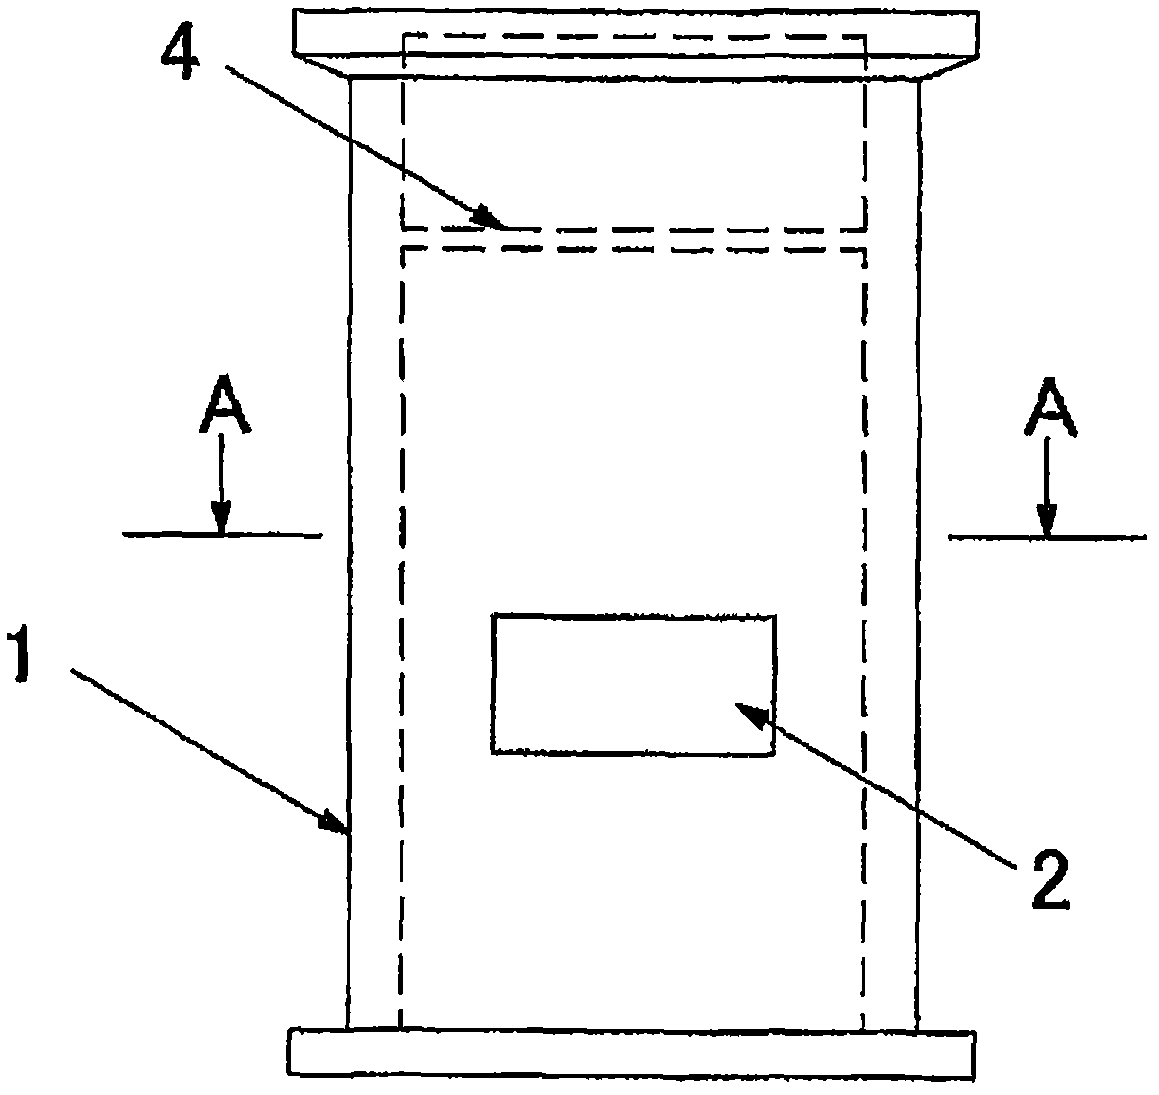 Water intake structure for water intake well